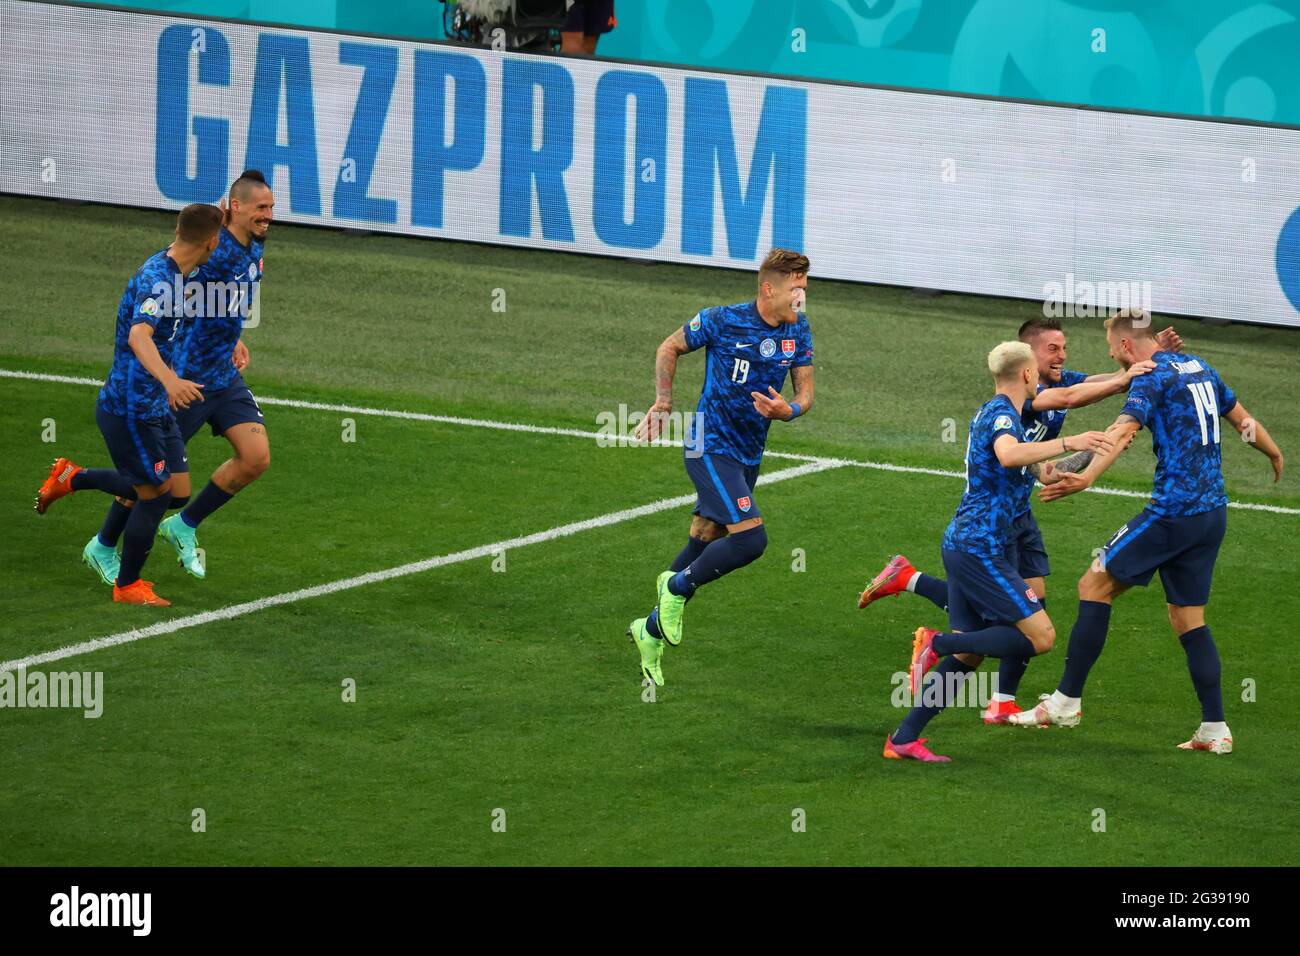 Saint Petersburg, Russia. 14th June, 2021. Ondrej Duda (8), Robert Mak (20), Milan Skriniar (14) of Slovakia are seen in action during the European championship EURO 2020 between Poland and Slovakia at Gazprom Arena.(Final Score; Poland 1:2 Slovakia). Credit: SOPA Images Limited/Alamy Live News Stock Photo